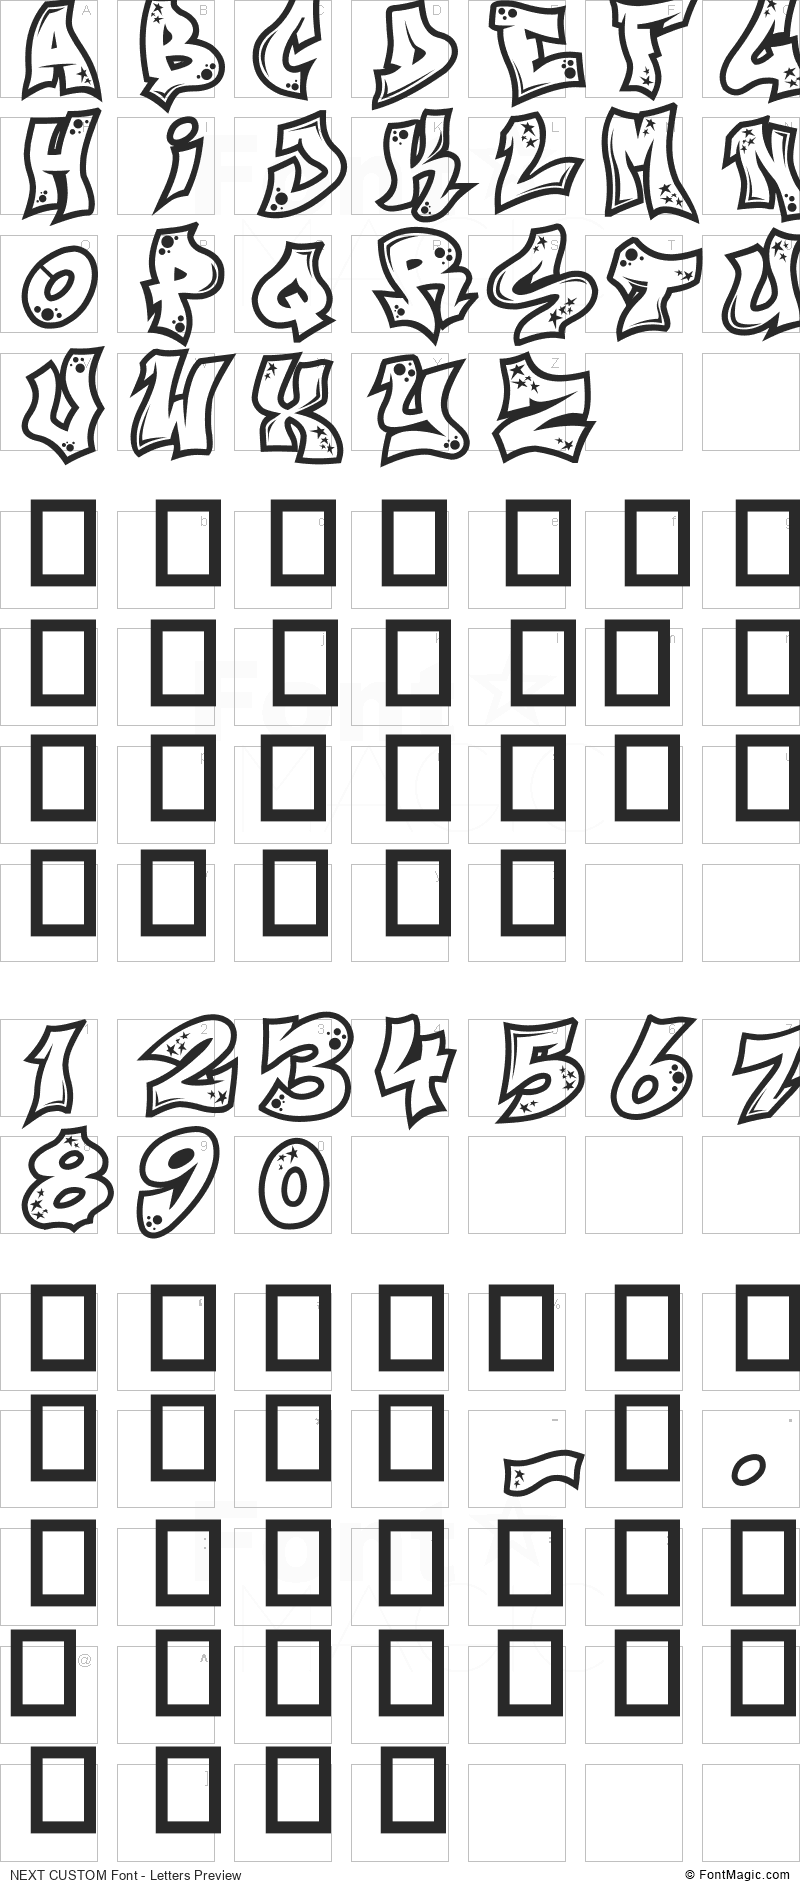 NEXT CUSTOM Font - All Latters Preview Chart